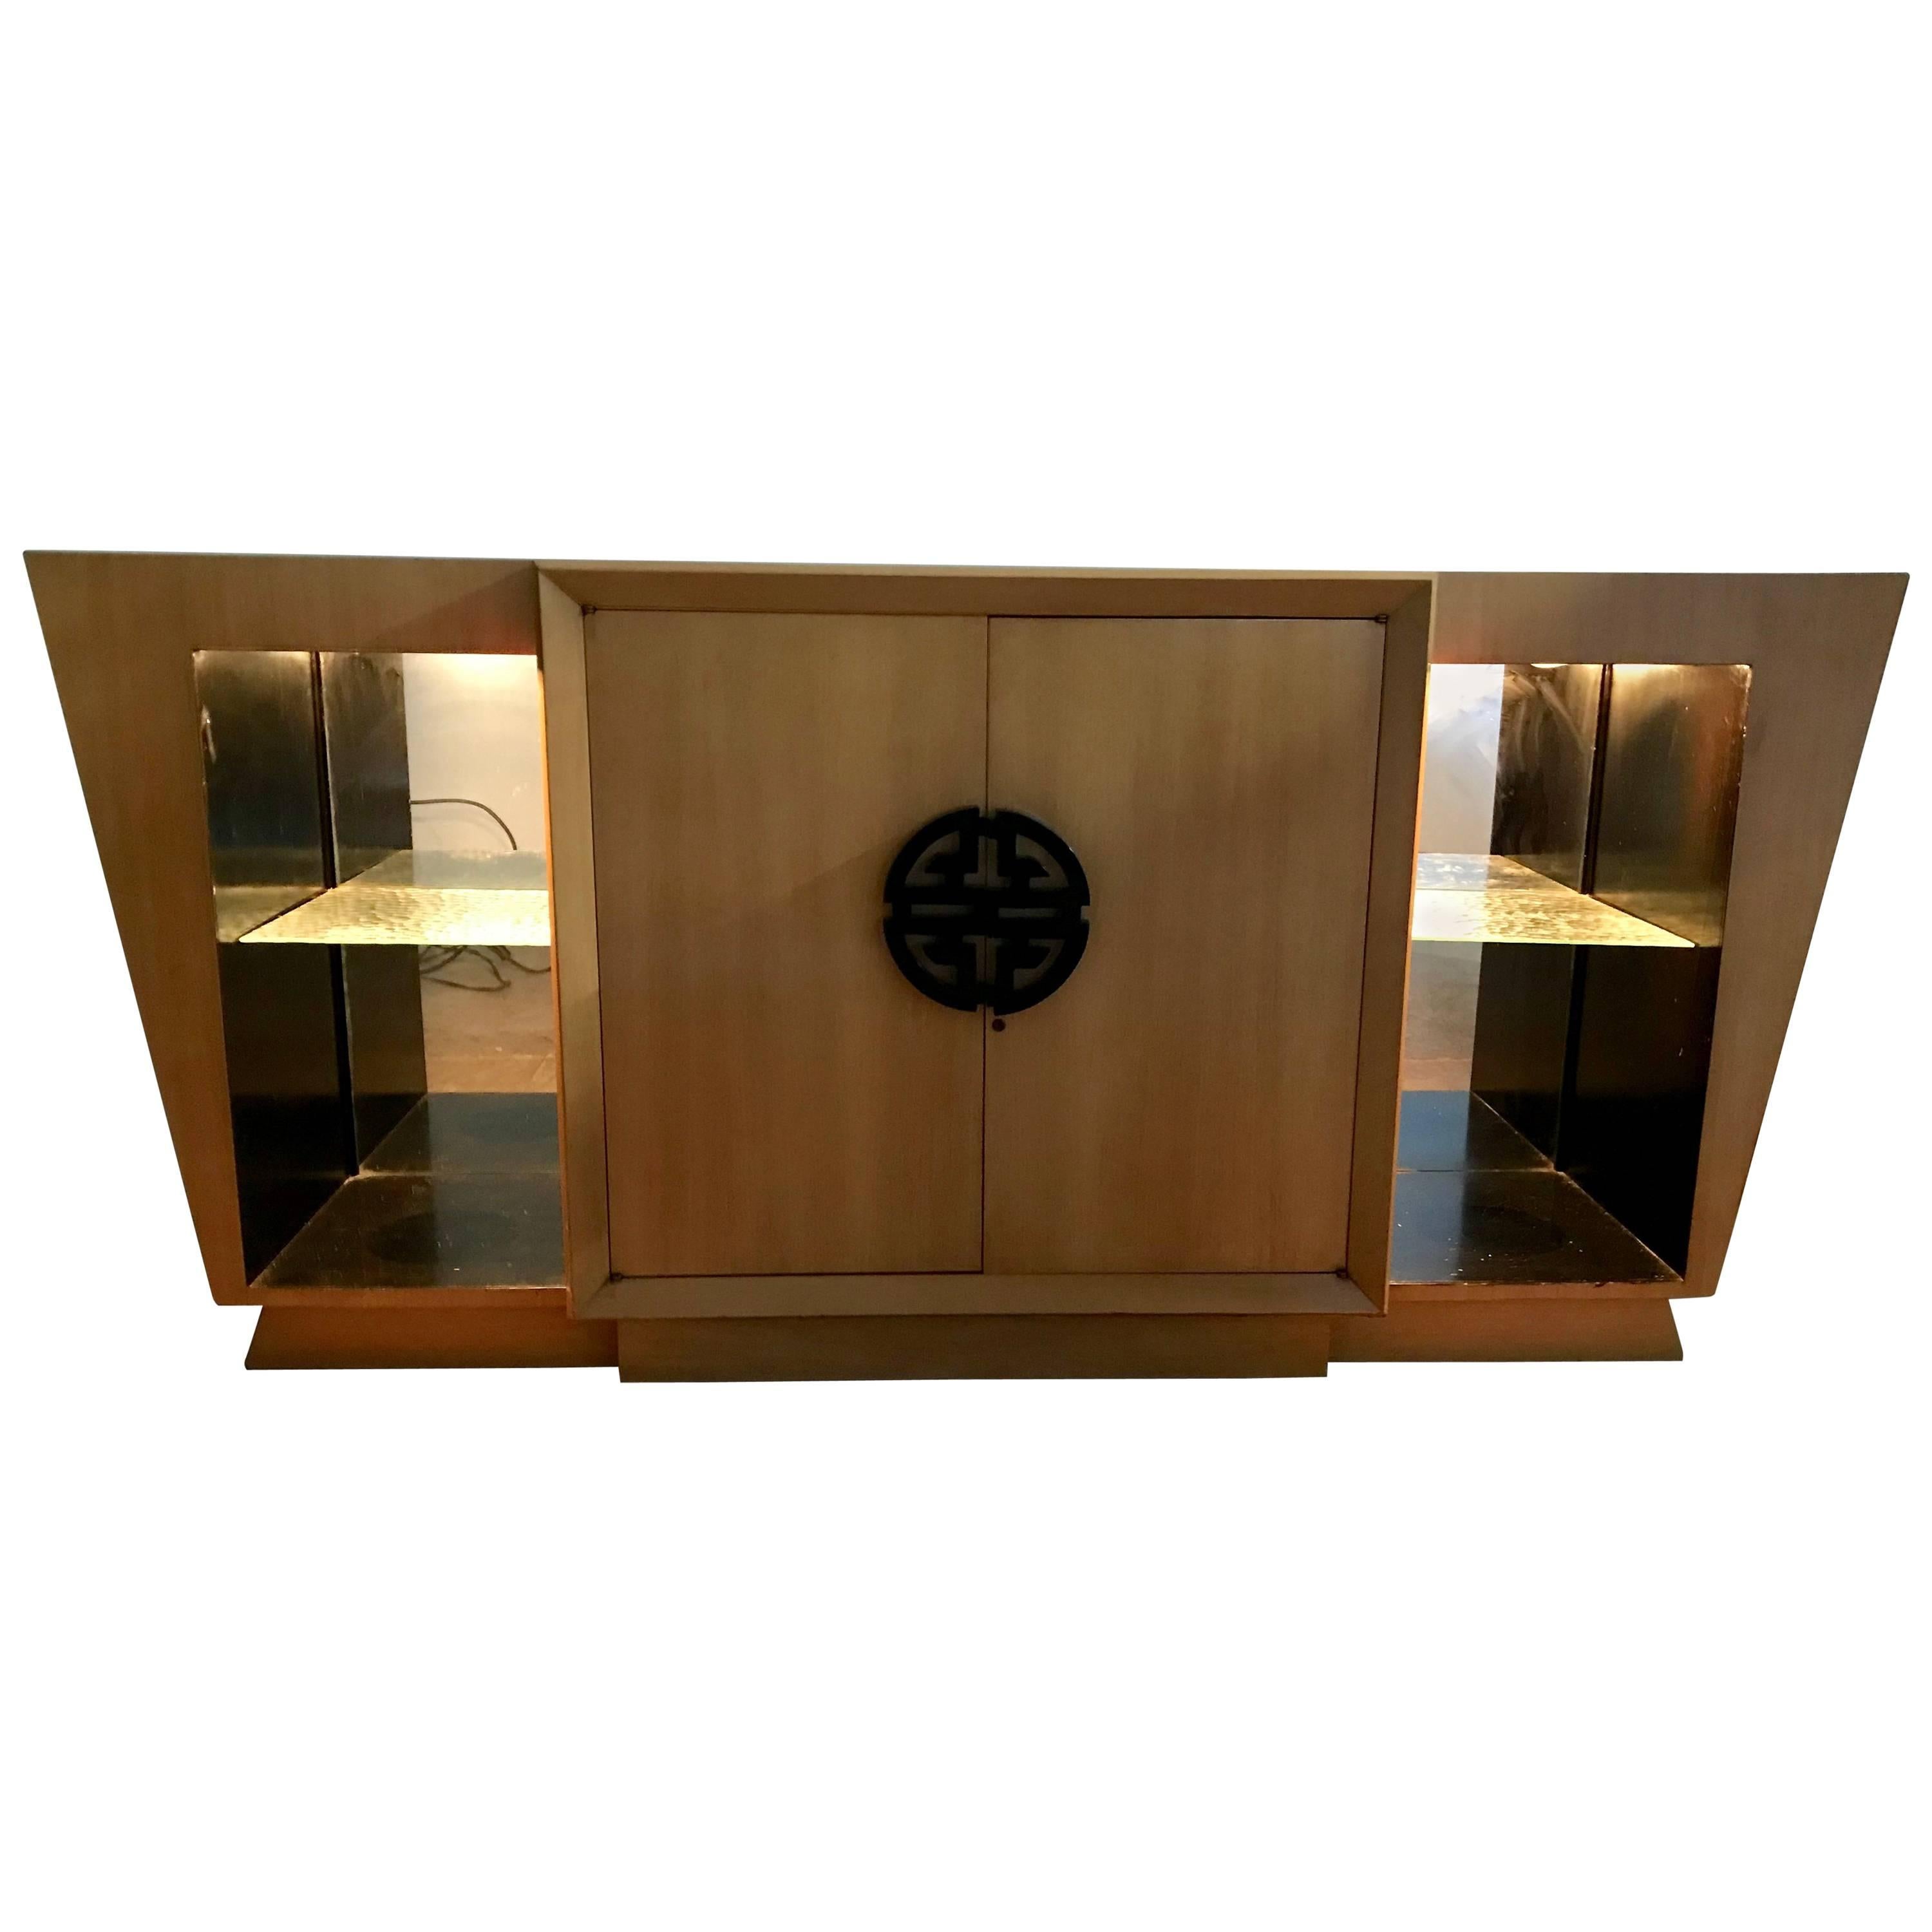 Striking Asian Modern Deco Style Light Up Dry Bar or Sideboard by Maximillion